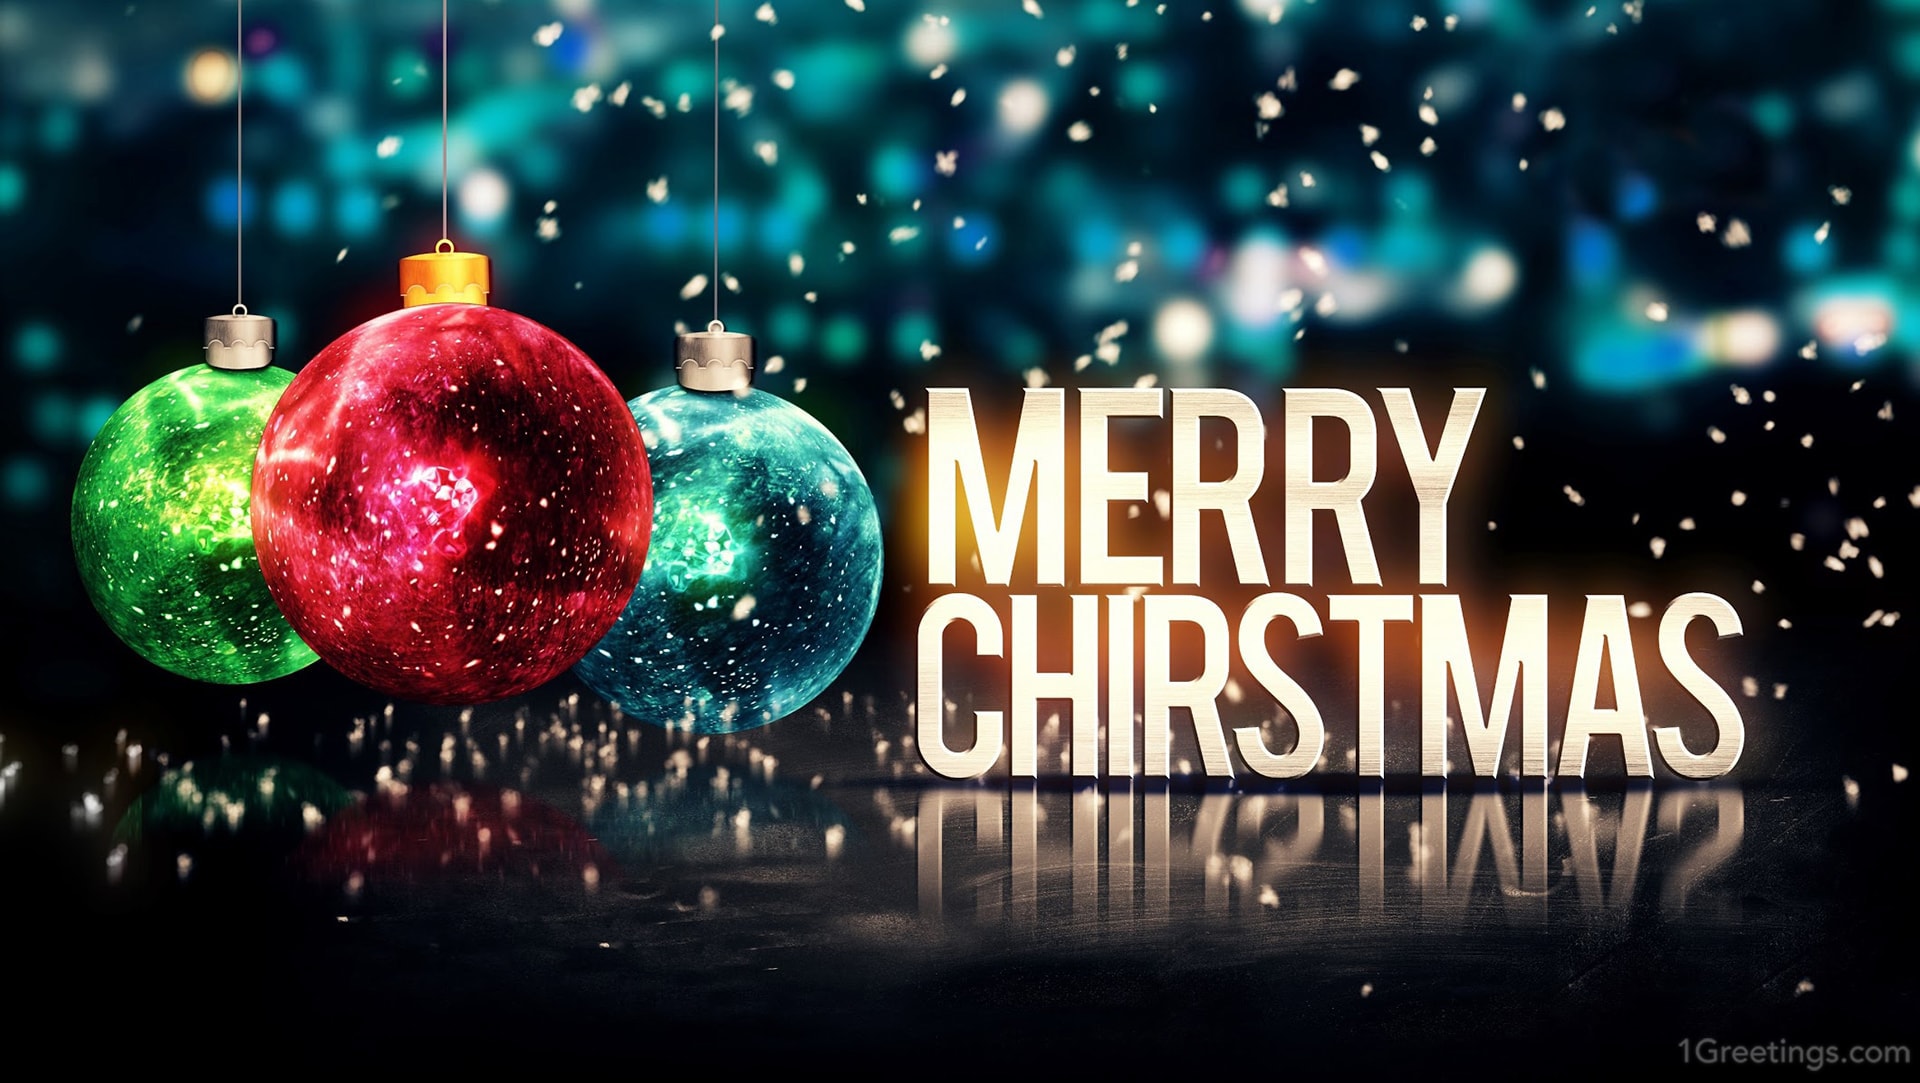 Merry Christmas Wallpaper Full HD Free Download - Images 7